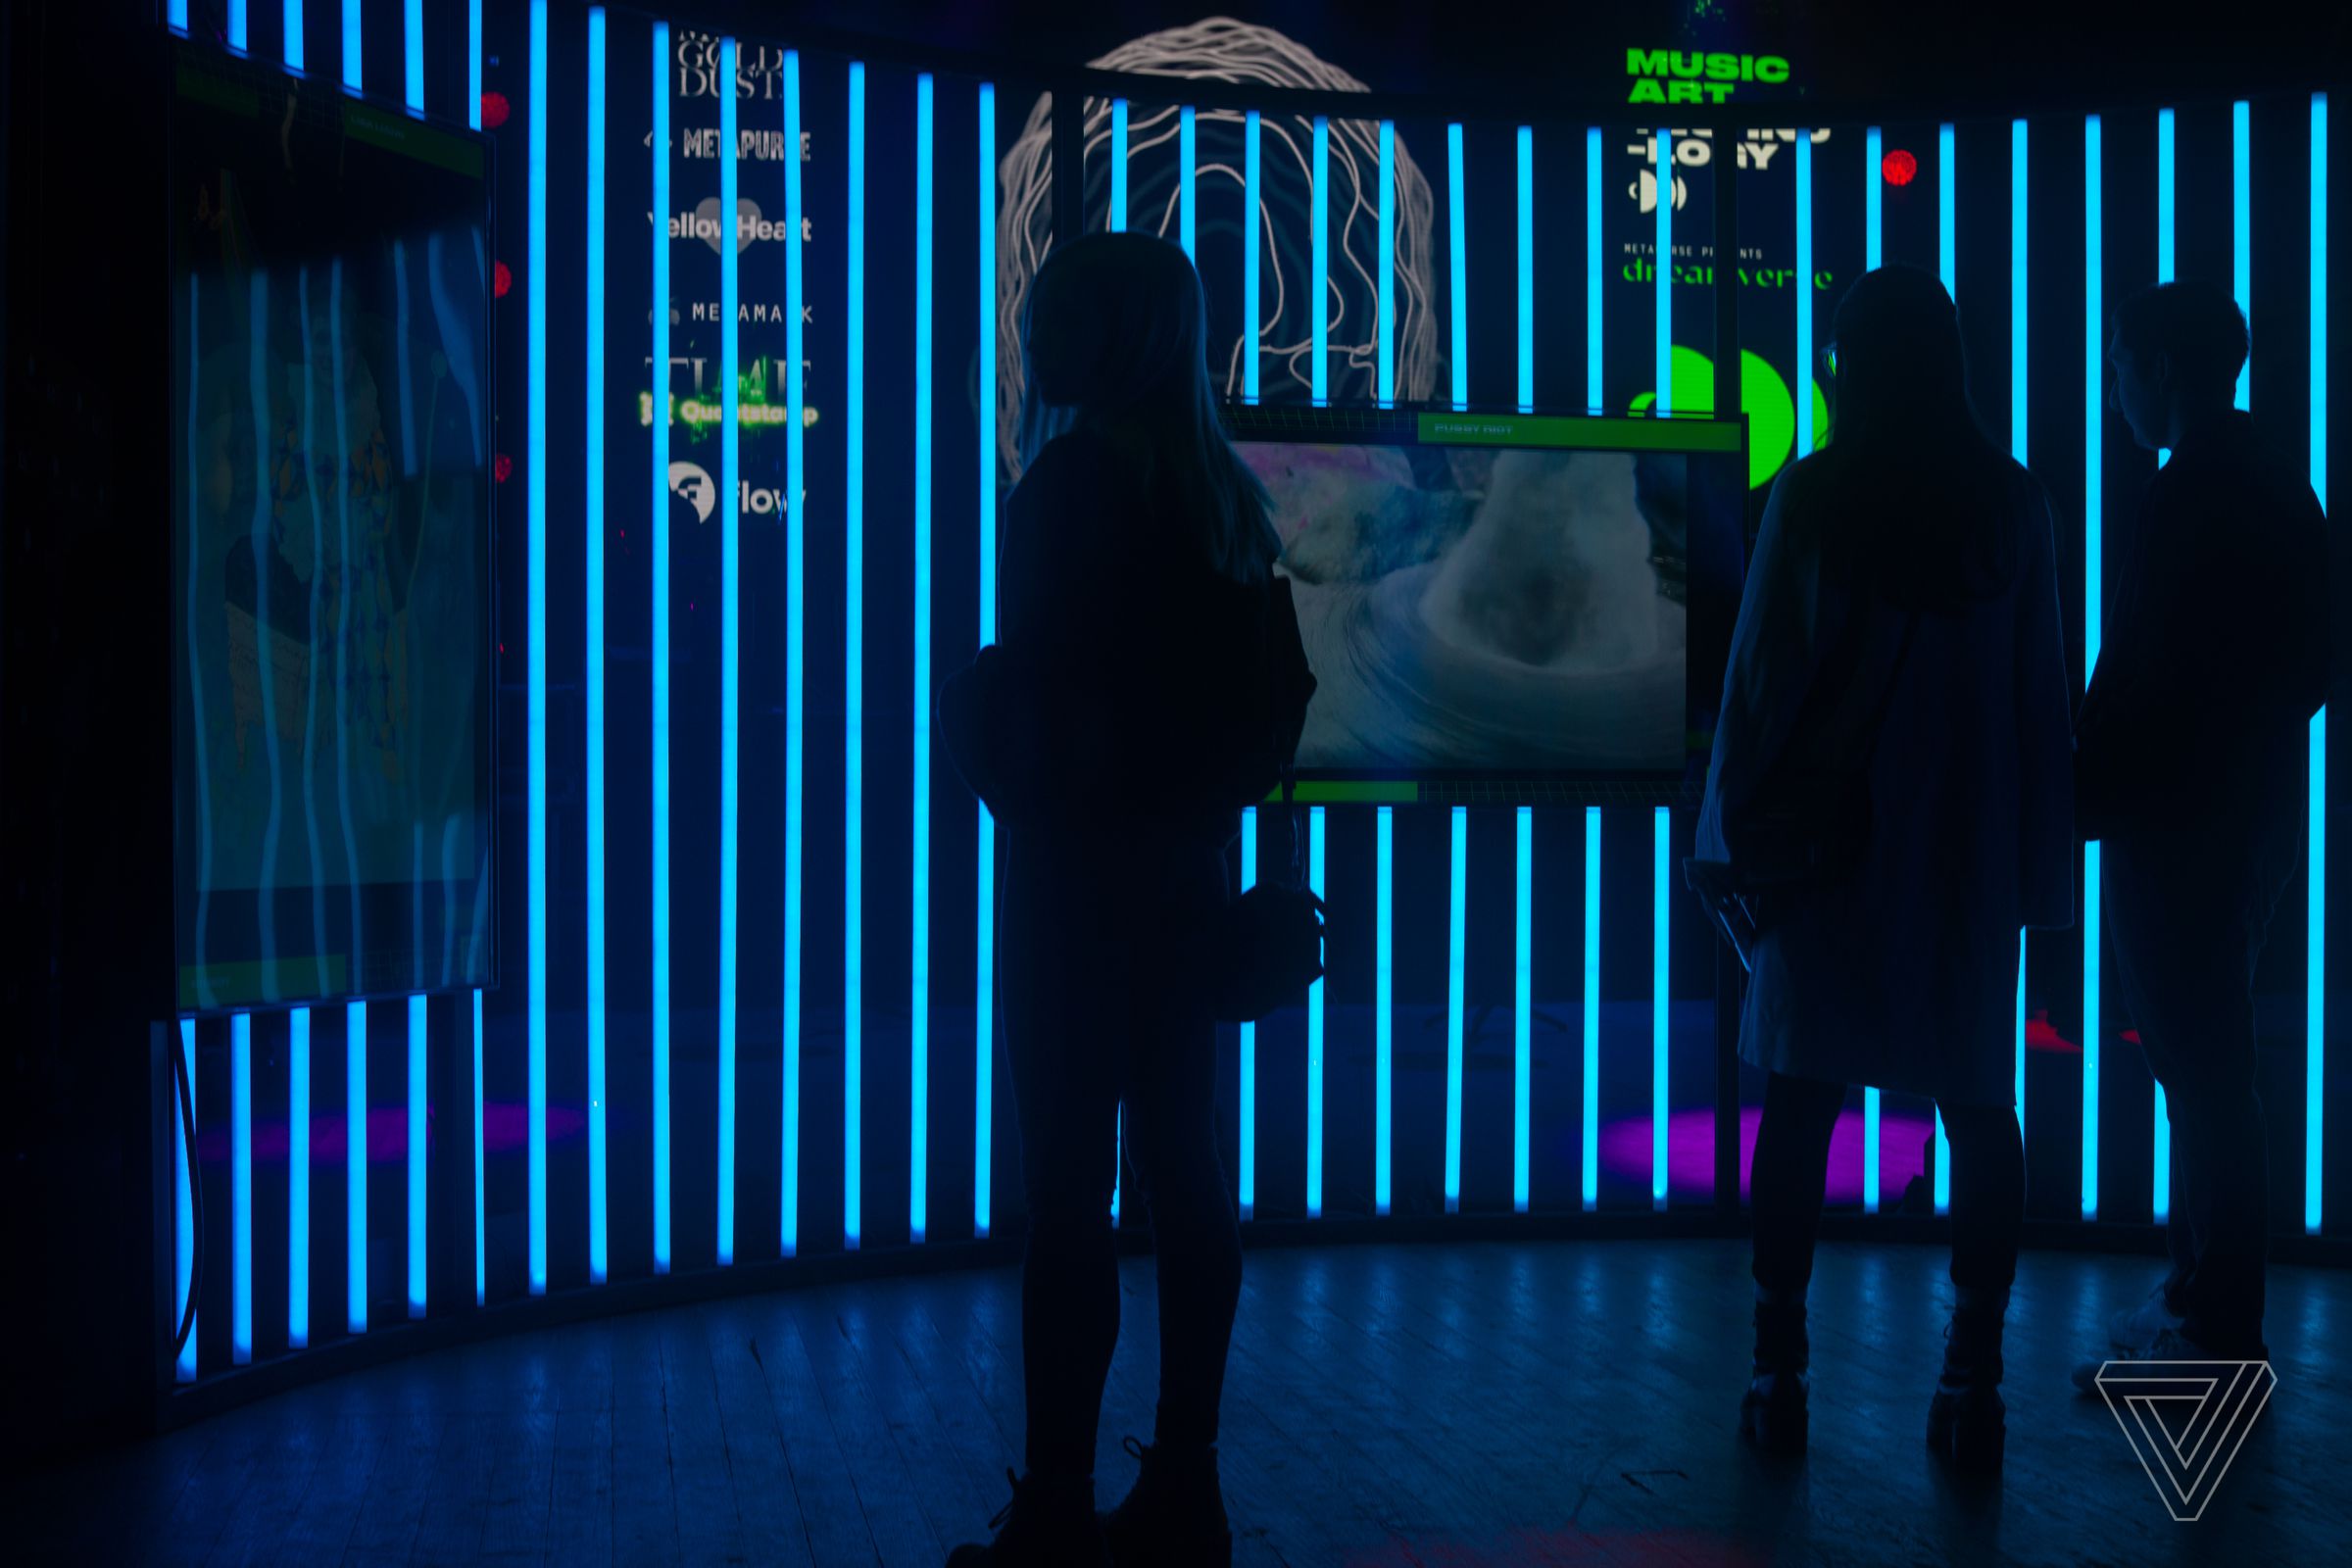 People stand in front of tubes of TVs showing NFT artwork. The TVs are mounted against tubes of blue light.